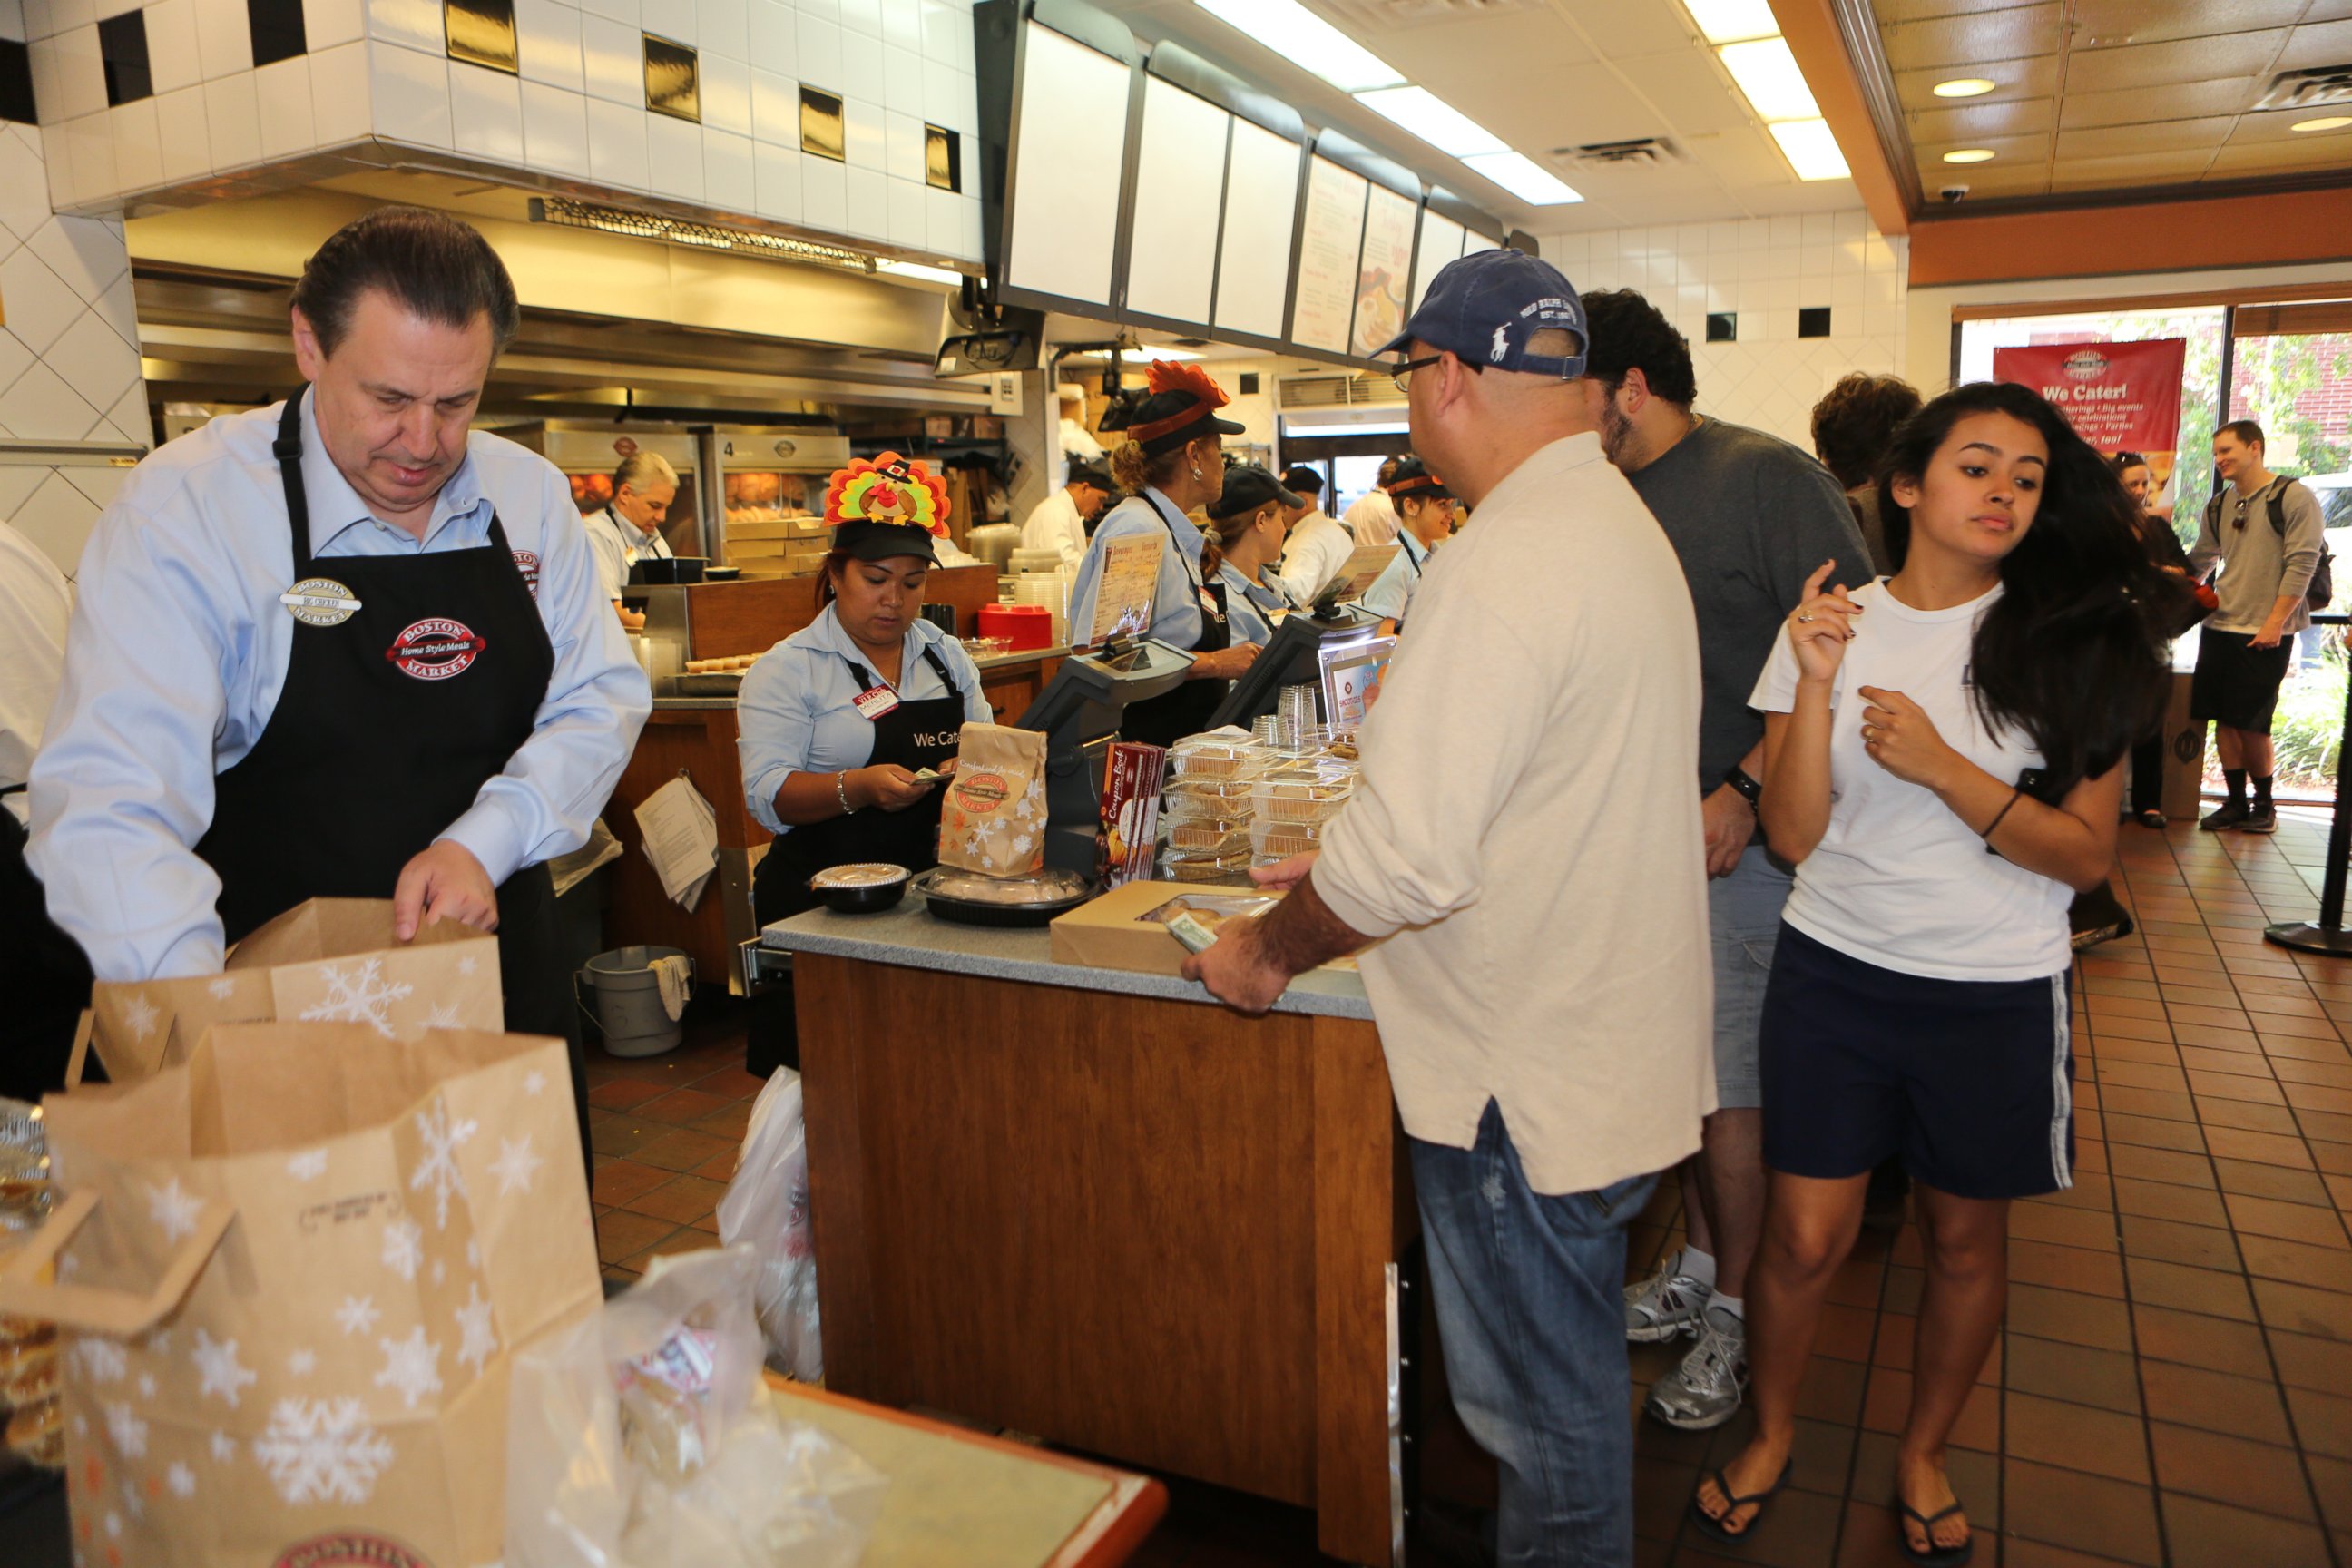 PHOTO: Boston Market CEO George E. Michael serves up Thanksgiving like the rest of company employees